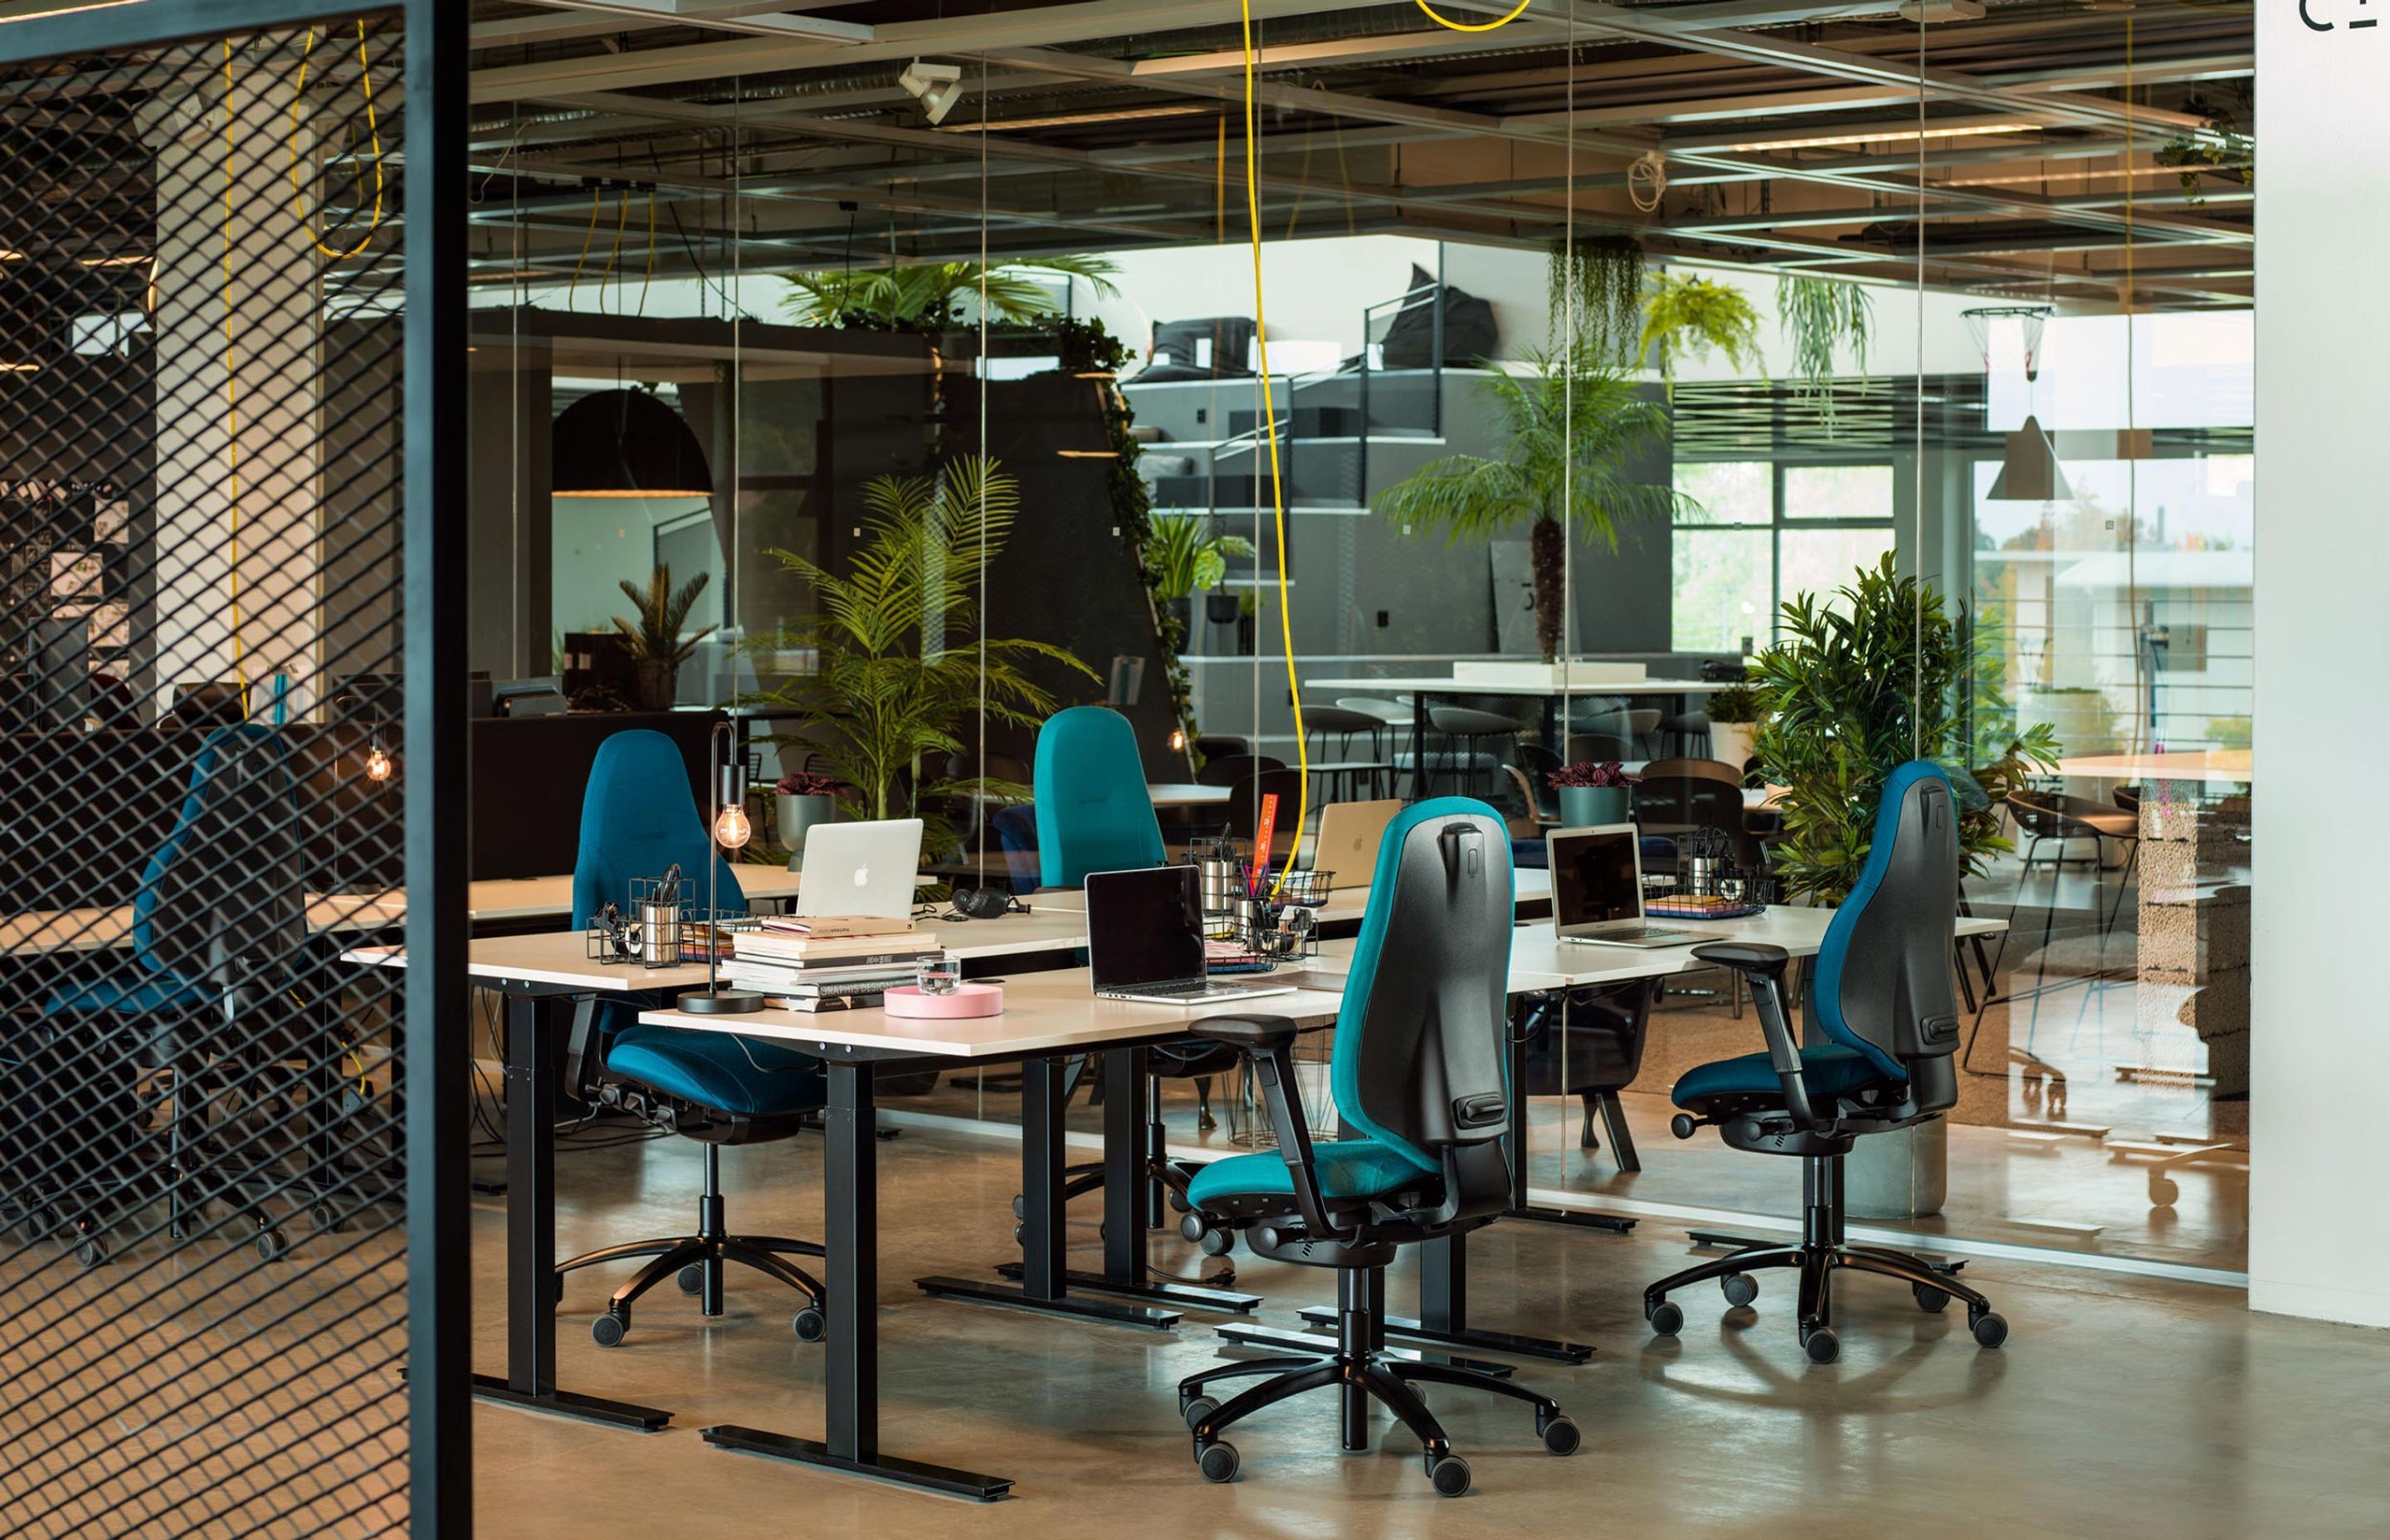 A colourful and vibrant open-plan workspace, with plants, pillars and RH Mereo chairs